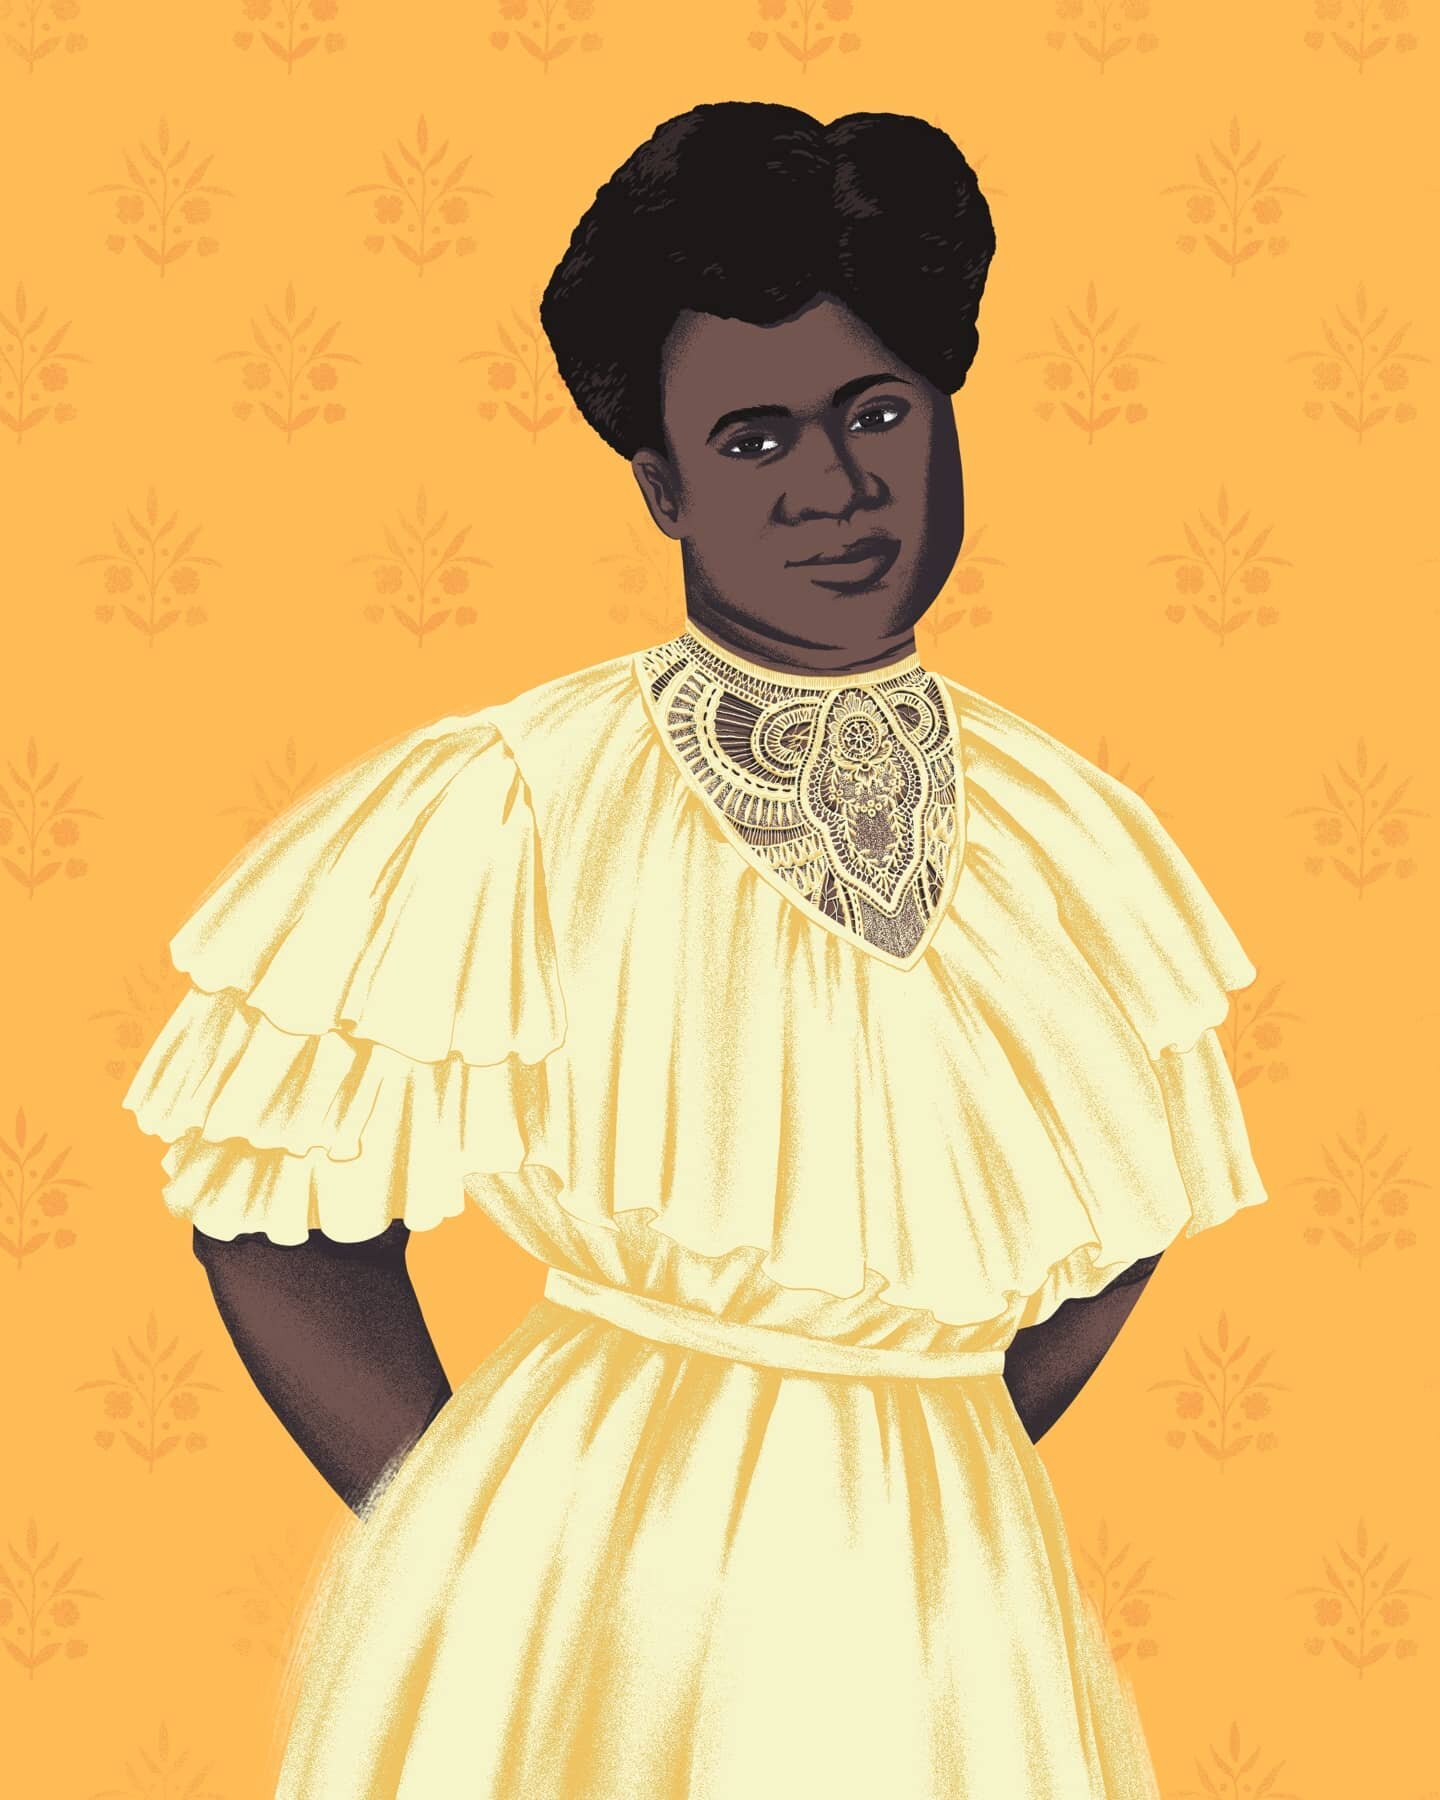 &quot;Perseverance is my motto.&quot;
- Madam CJ Walker

I'll be celebrating Women's History Month with commemorative portraits of women both in the past and present who are making history!

Madam CJ Walker was an African American entrepreneur and ac